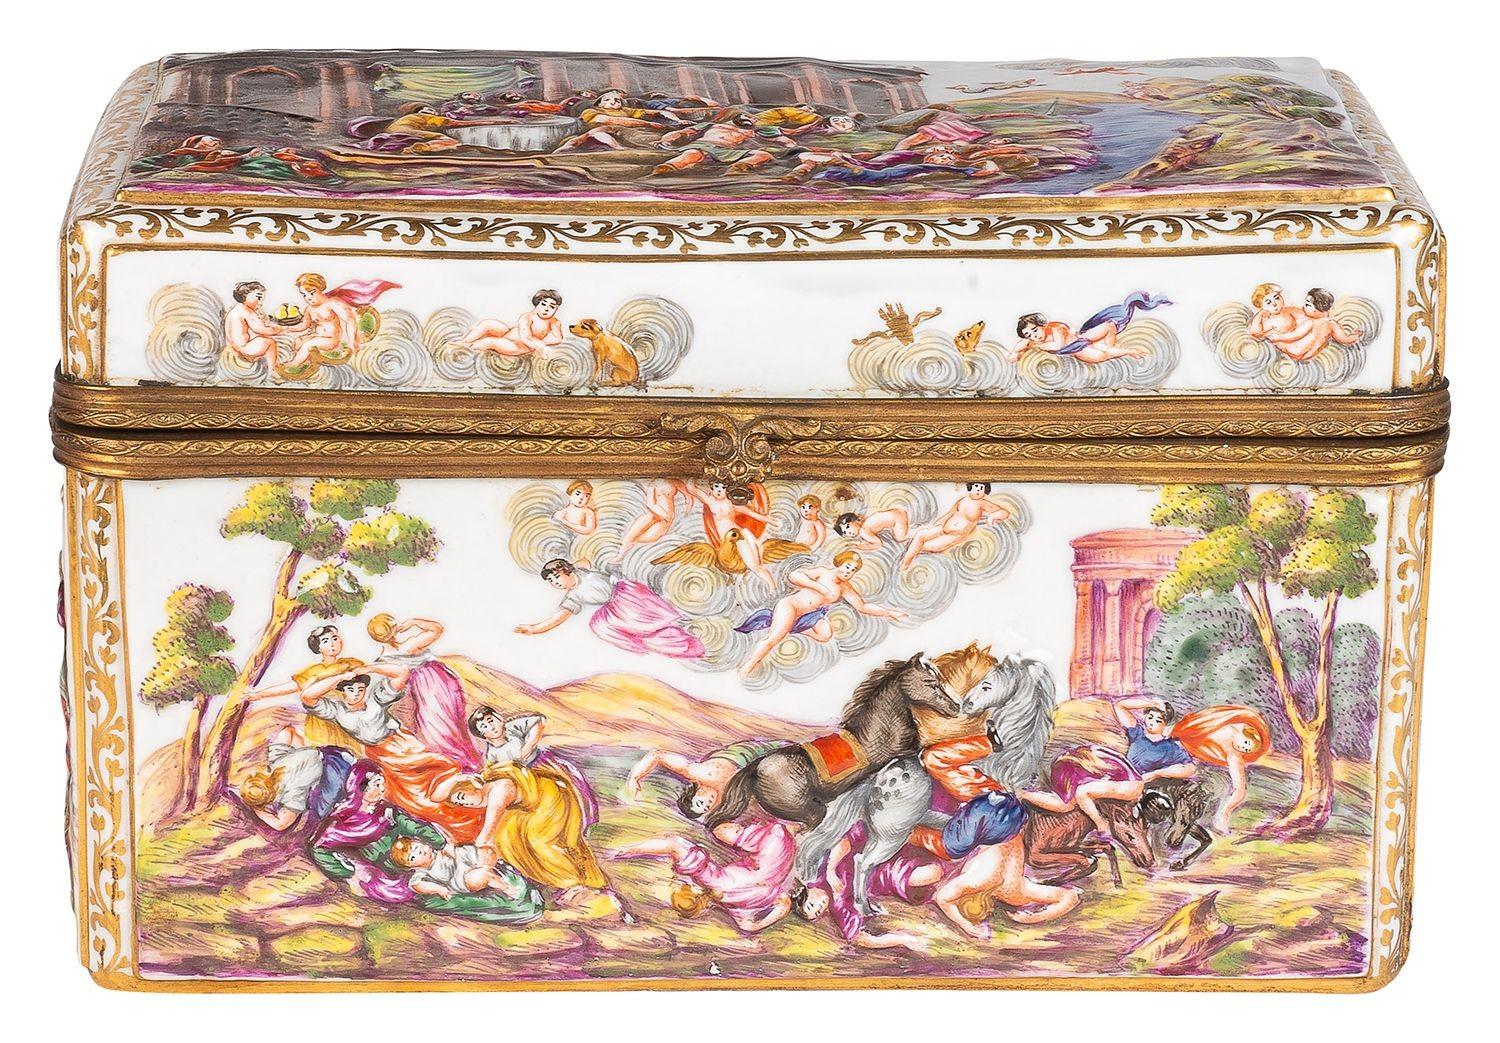 A very good quality late 19th Century Capodimonte porcelain casket, depicting classical religious and heavenly scenes.
Batch 74 G9811/22. SNYZ